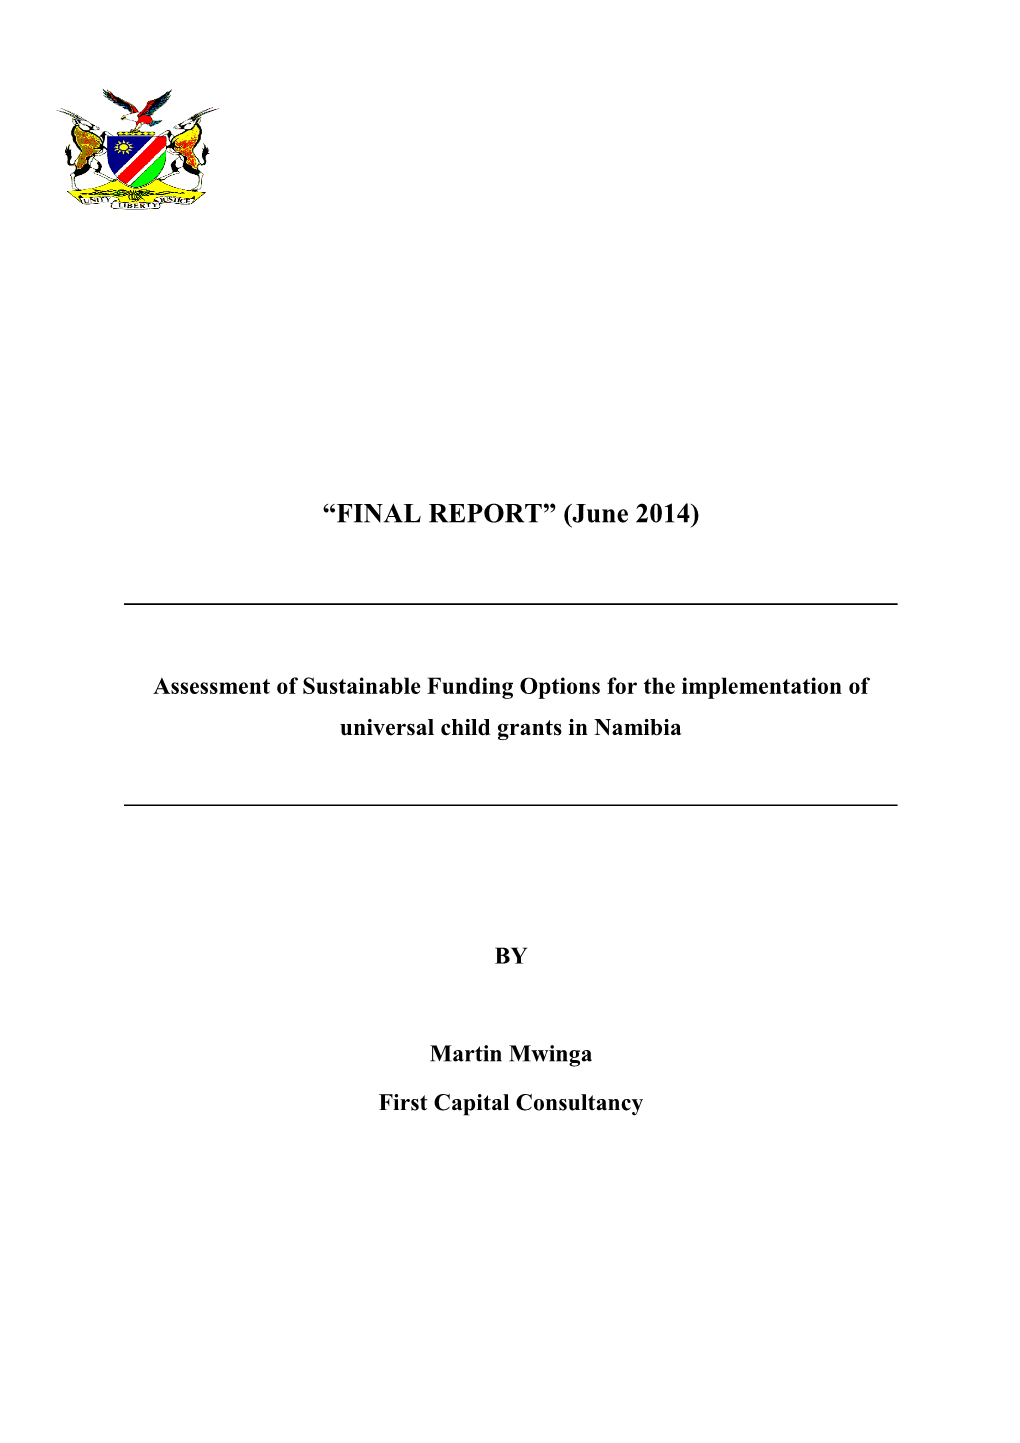 Assessment of Sustainable Funding Options for the Implementation of Universal Child Grants